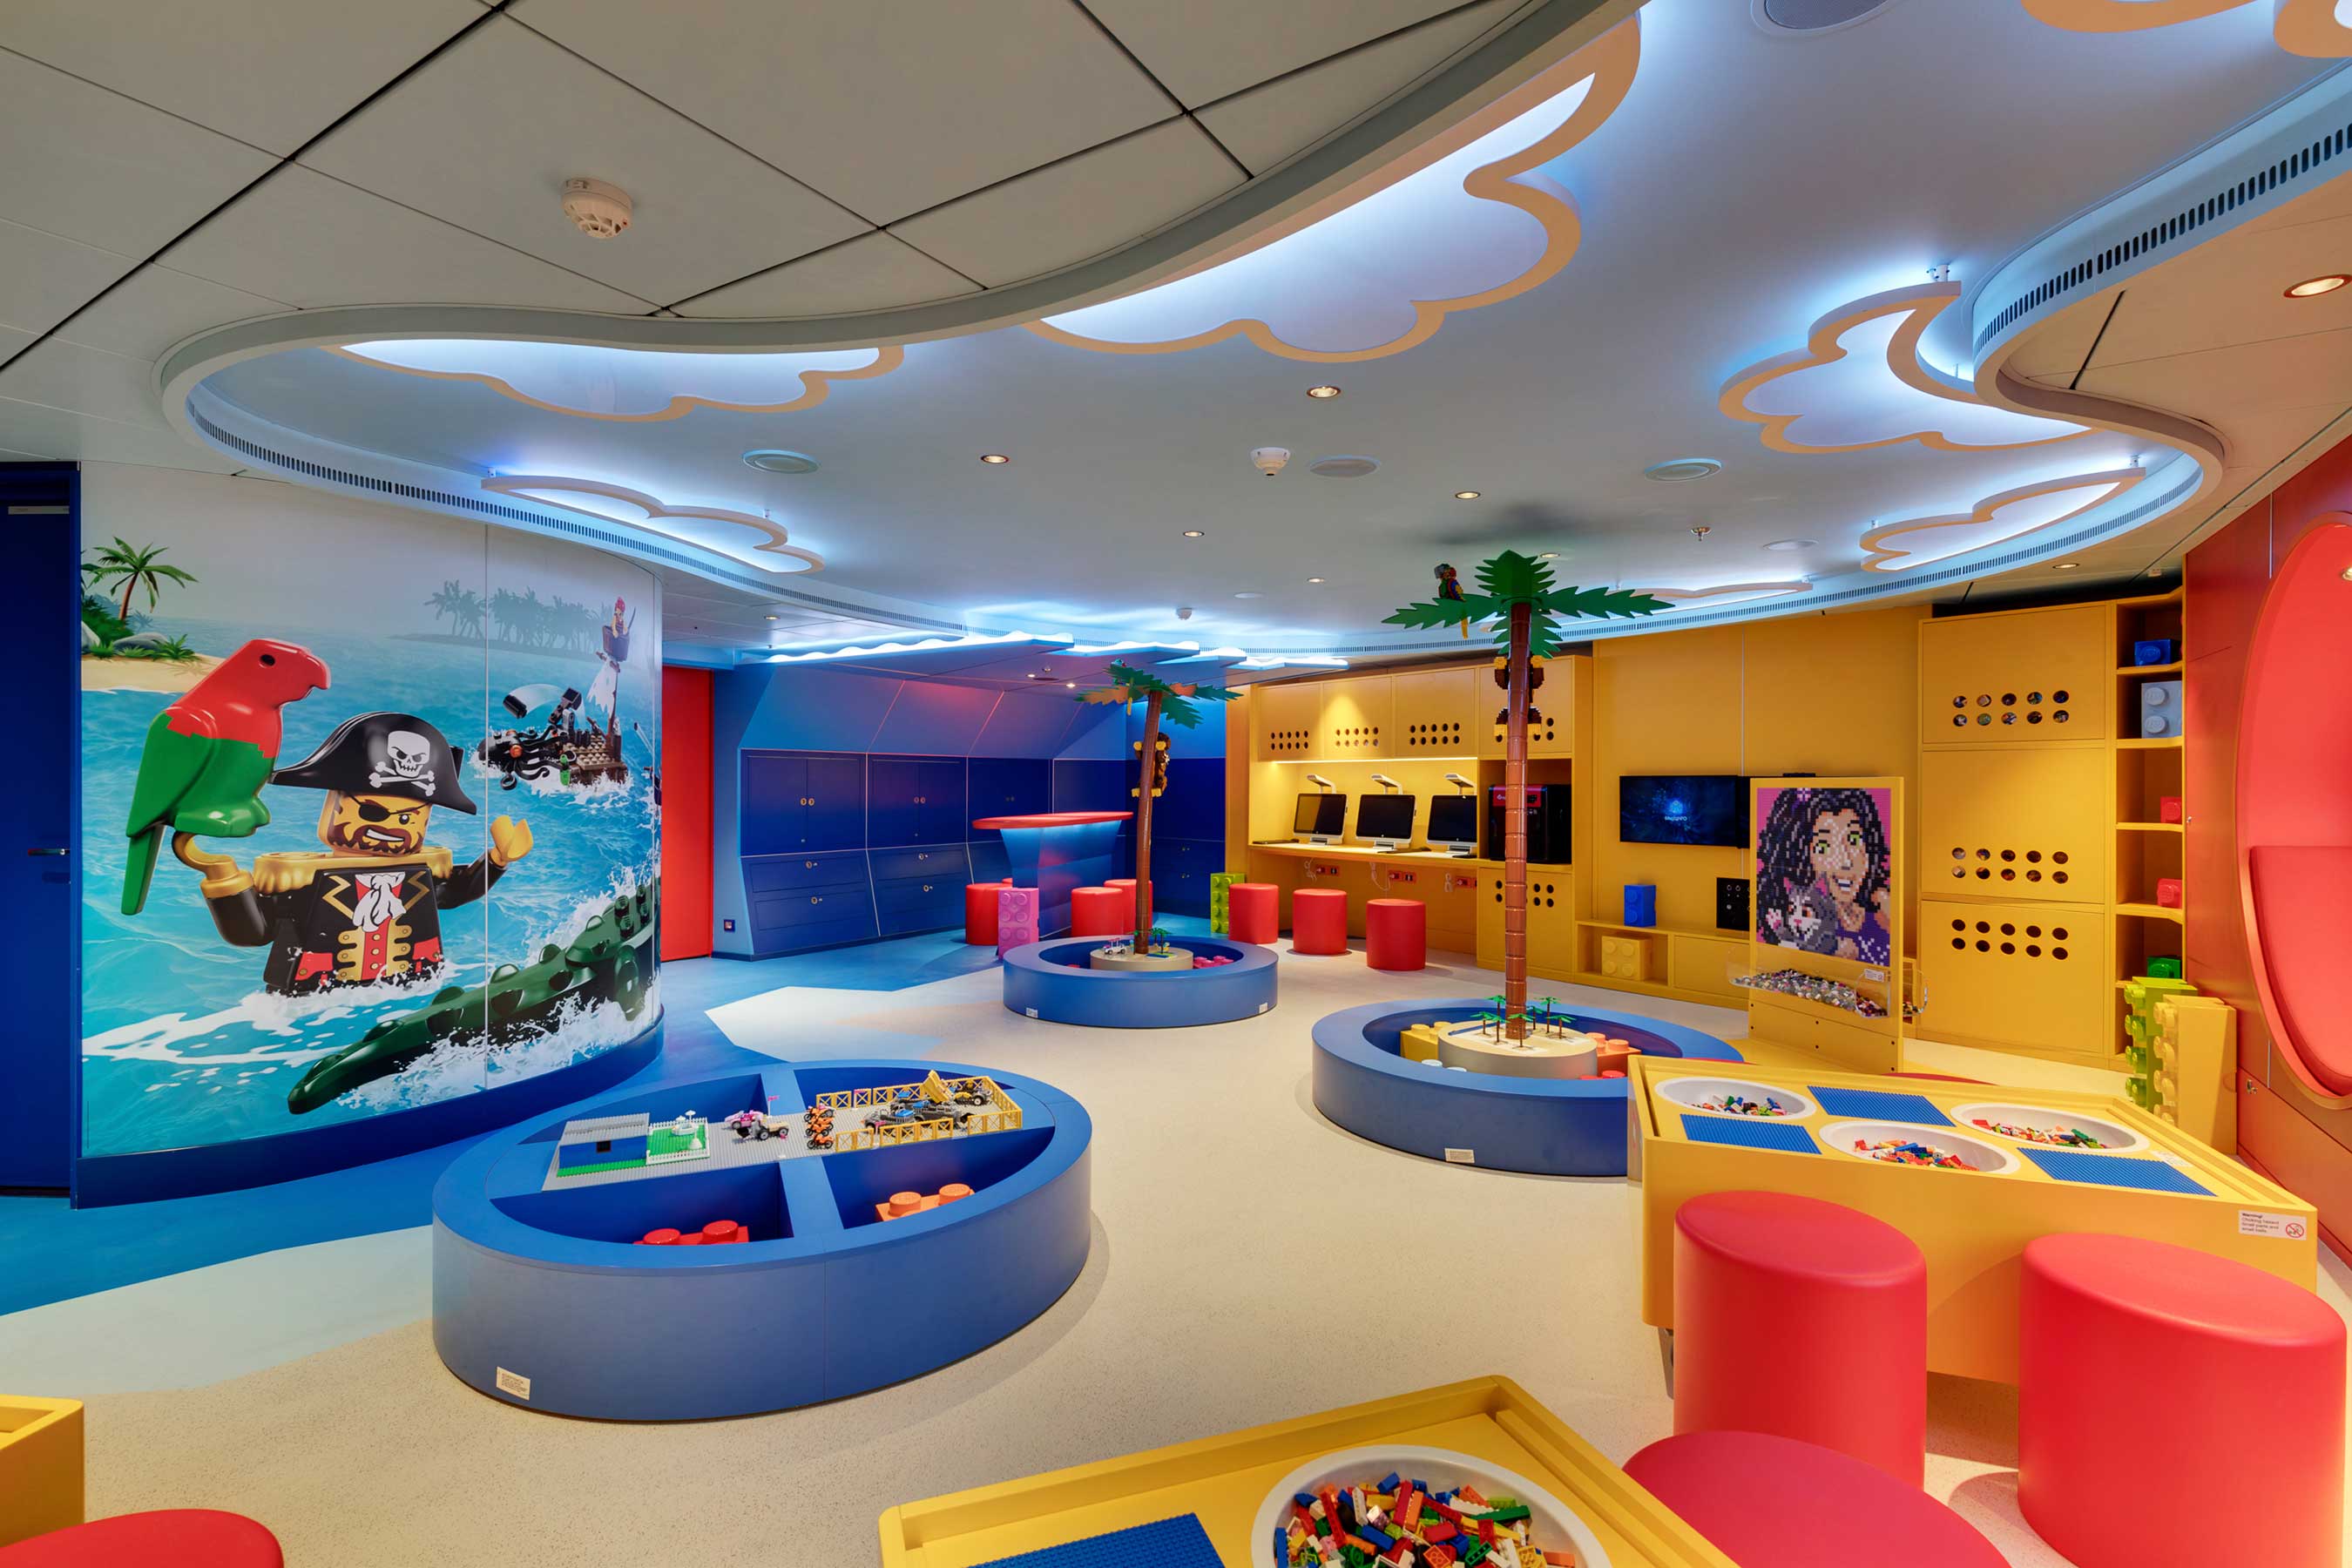 Elementary-aged kids can take part in tailored entertainment offered in the Junior Club LEGO® playroom, complete with Pirates and 3D printing stations